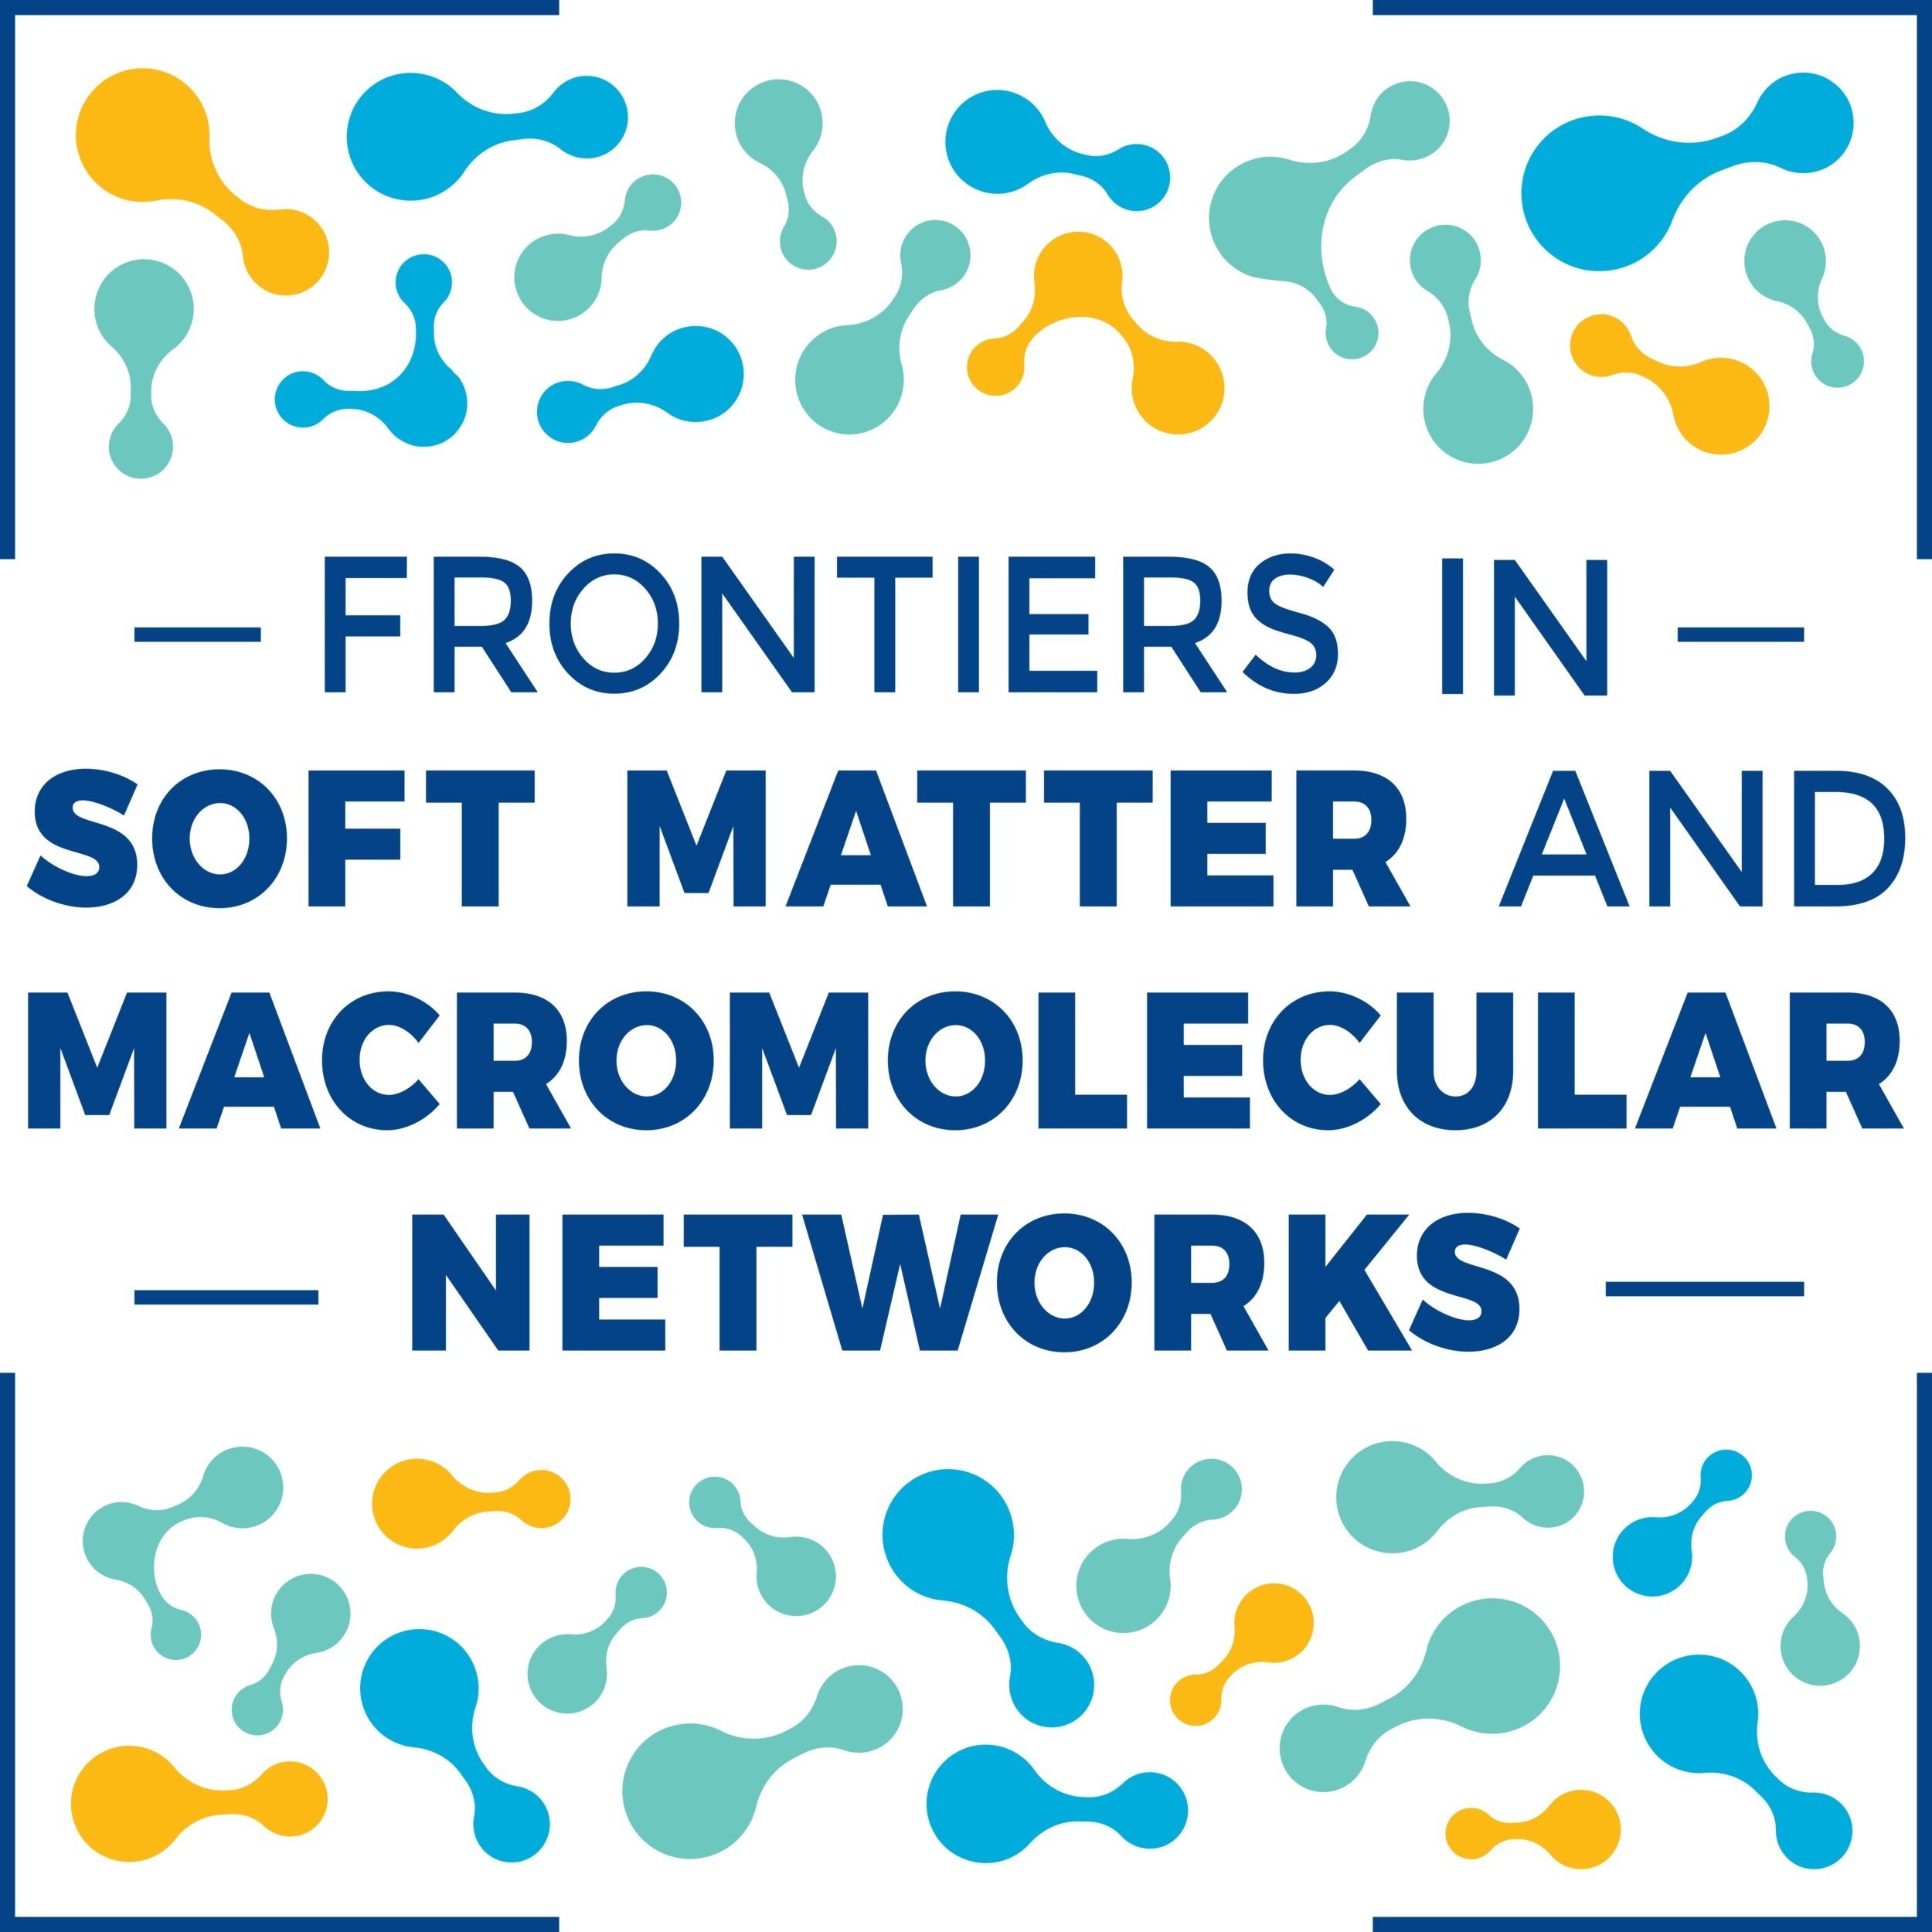 Frontiers in Soft Matter and Macromolecular Networks